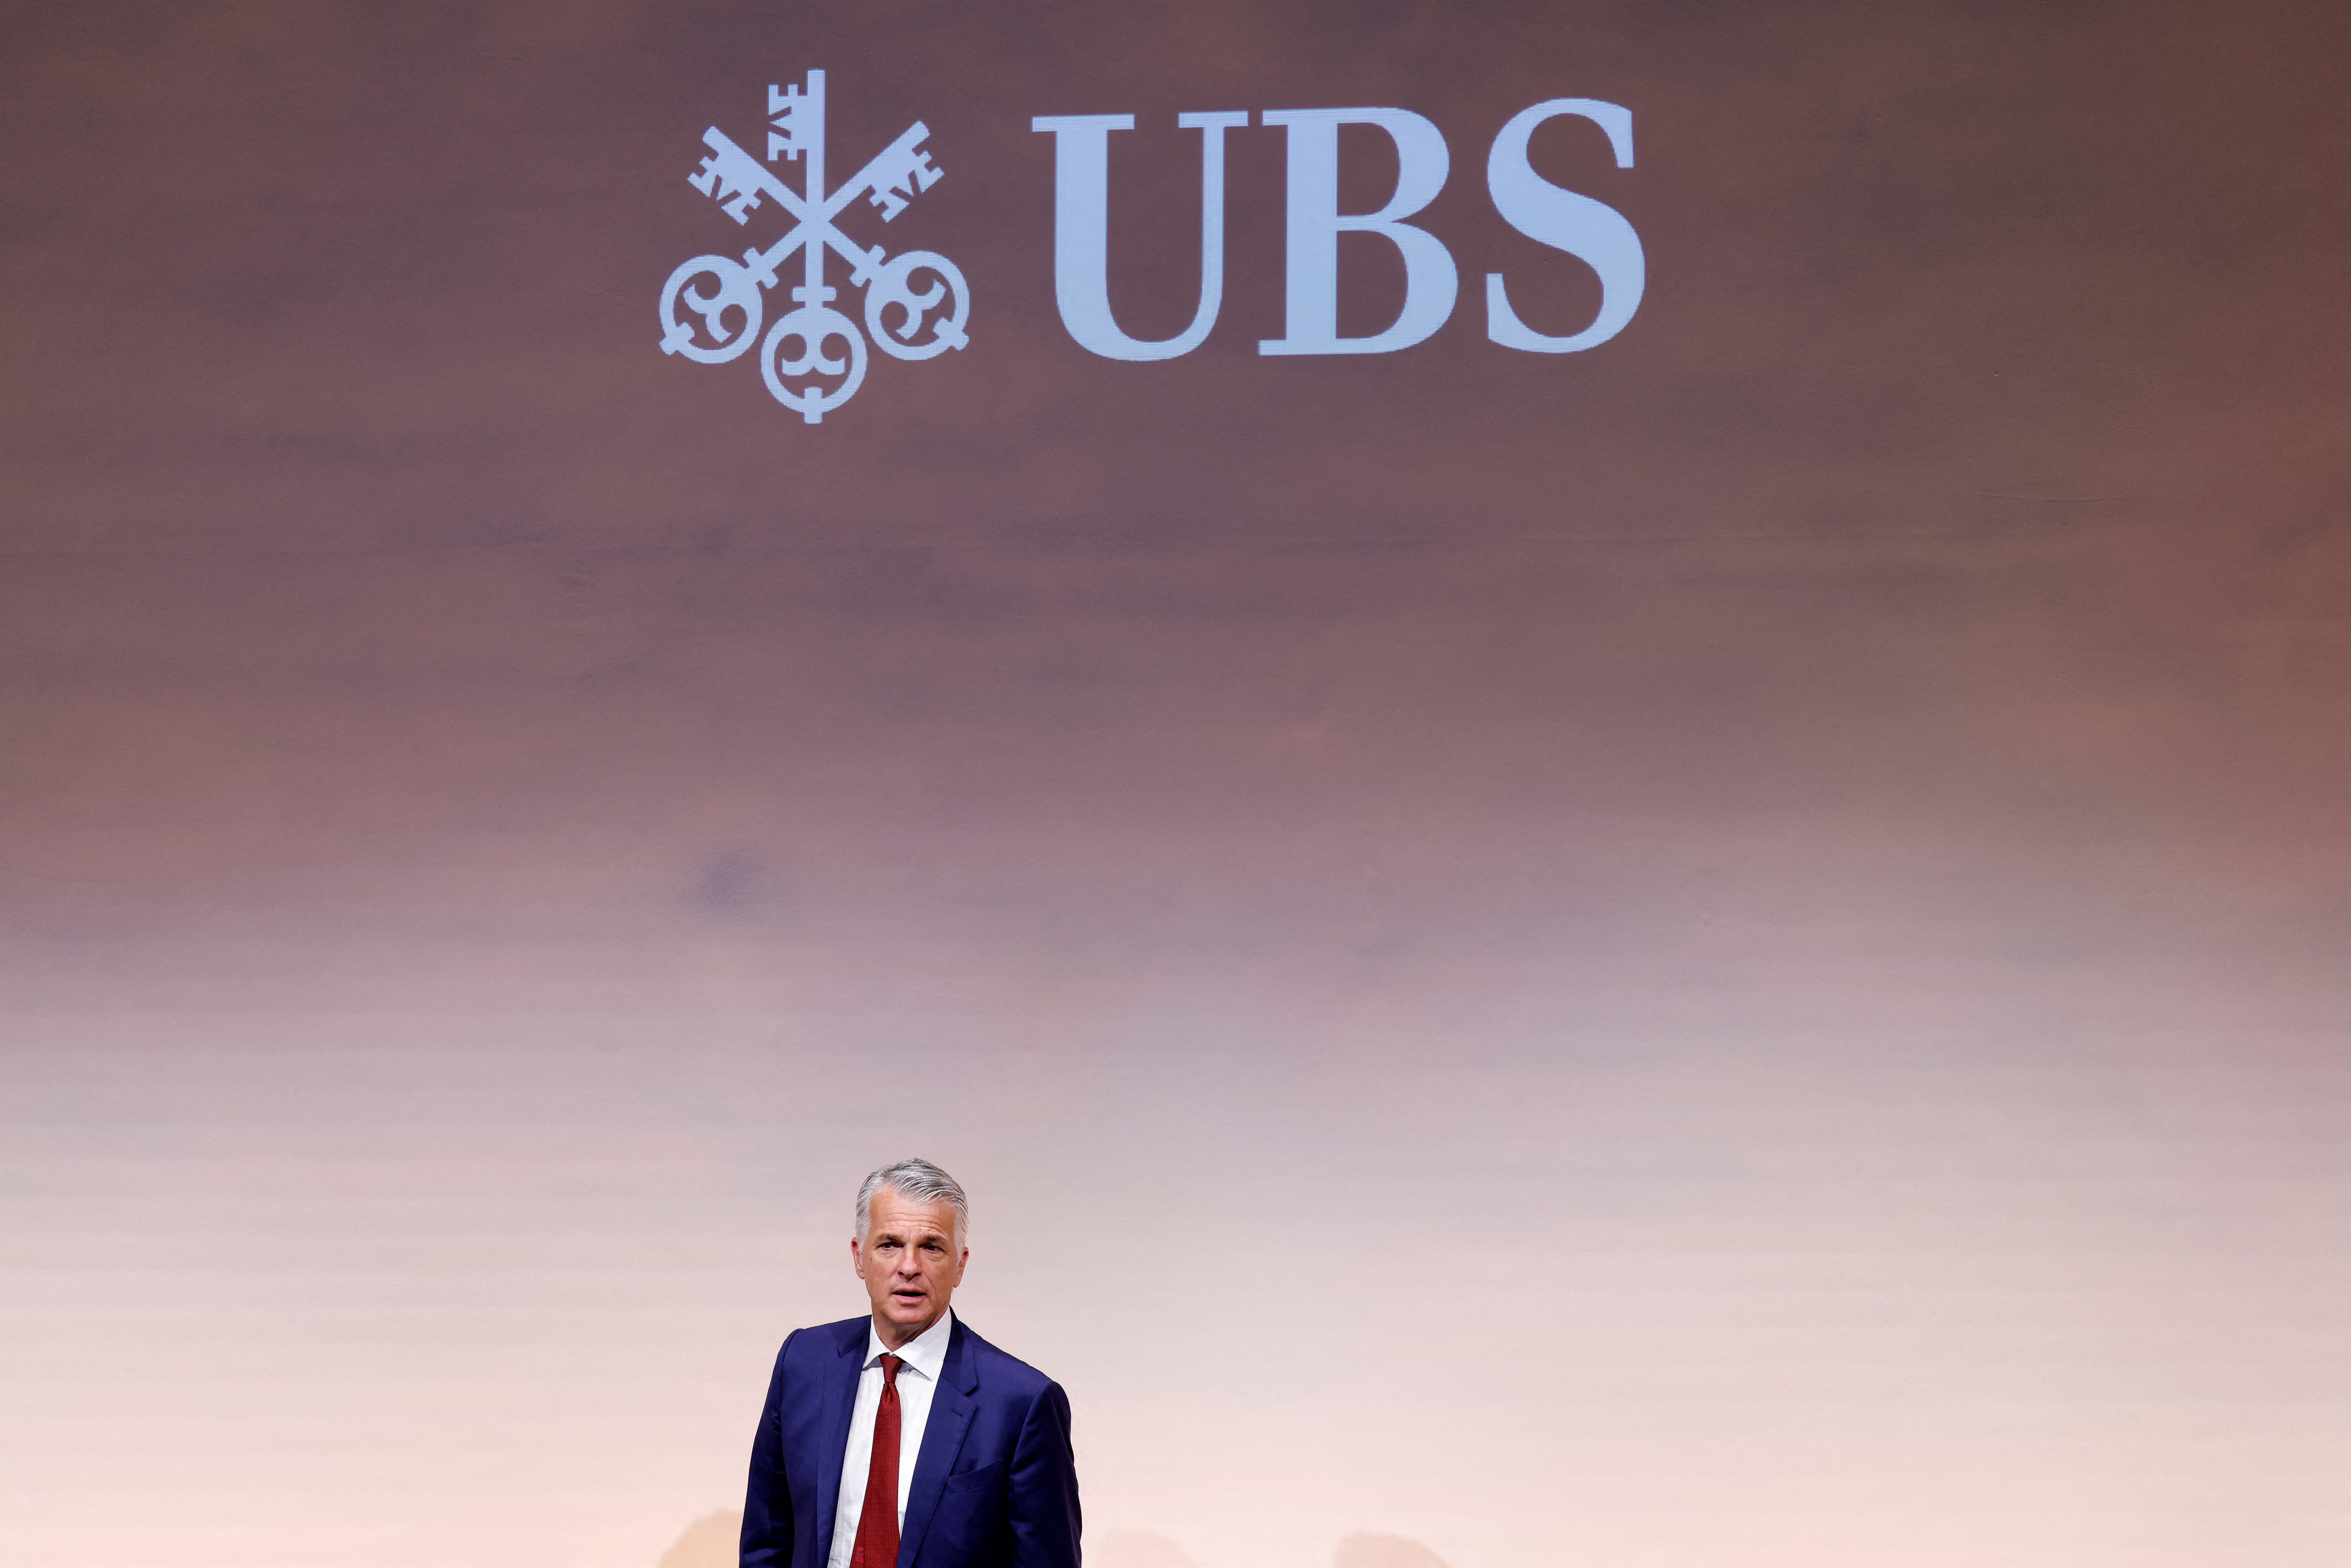 UBS Group AG news conference in Zurich